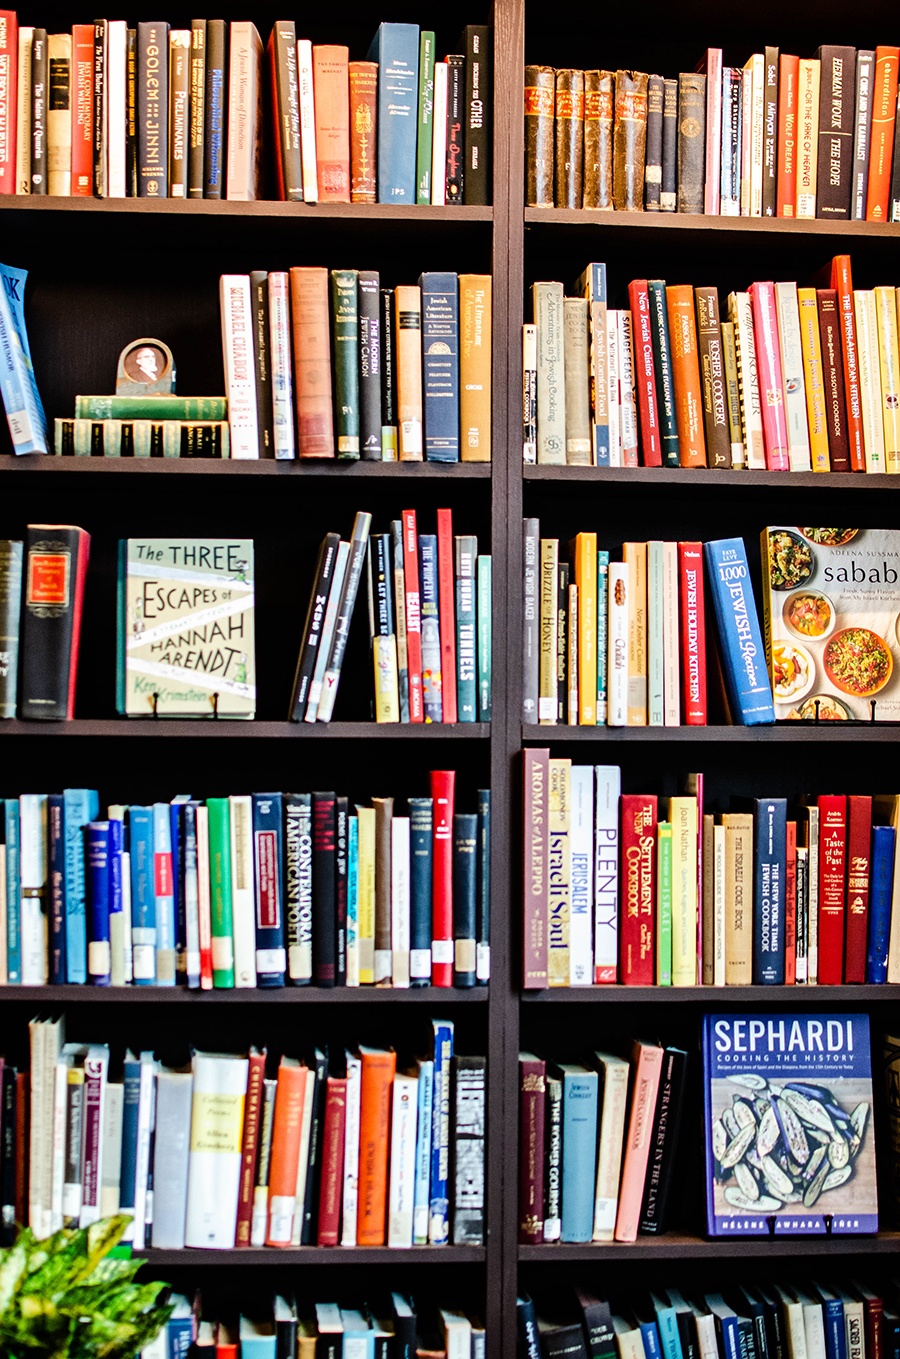 A bookshelf is full of books about Judaism and by Jewish authors.